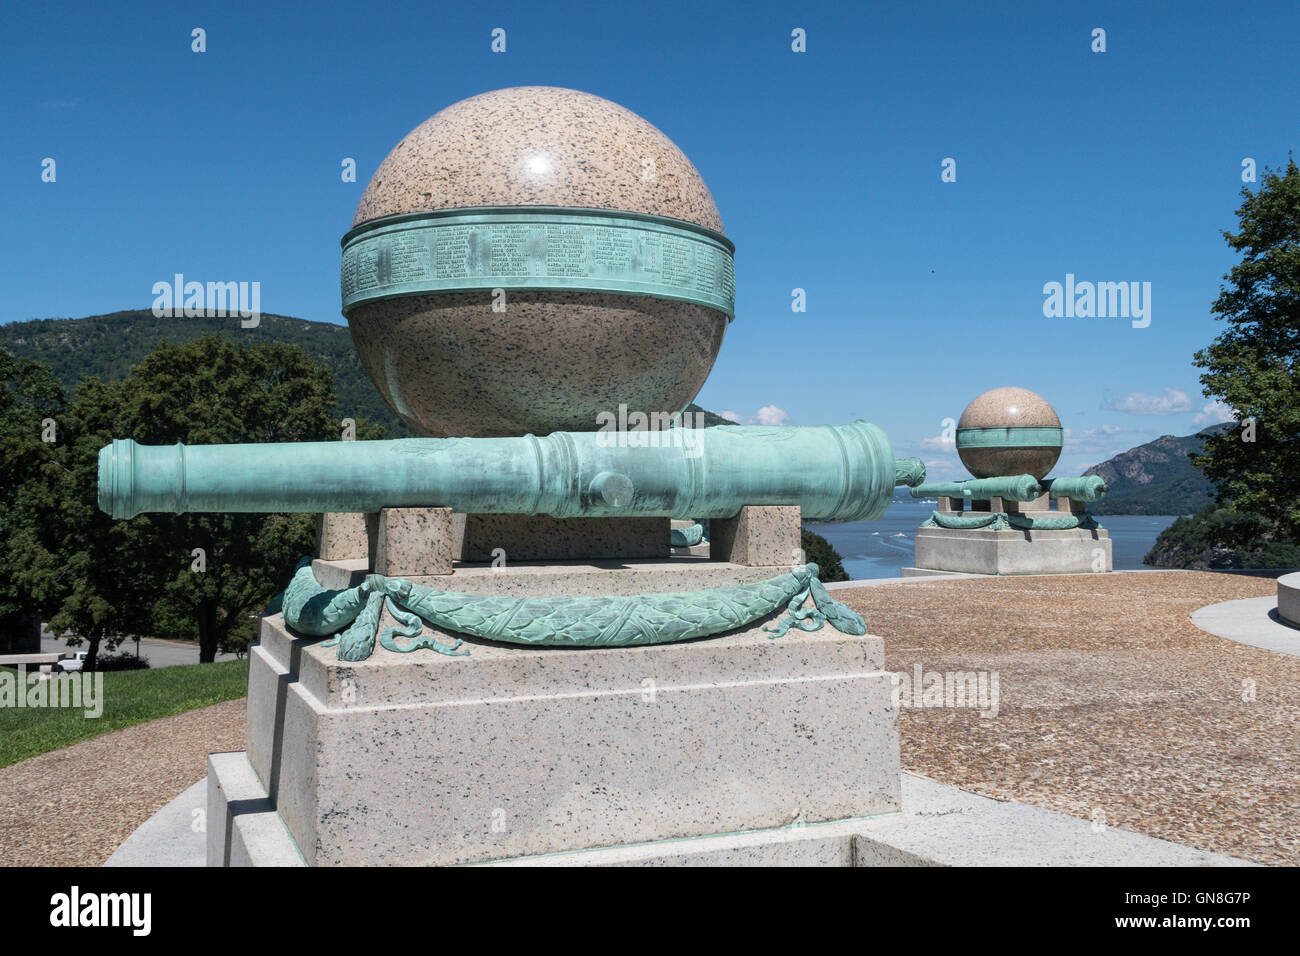 Battle Monument at Trophy Point commemorates Union veteran casualties of the Civil War, New York, USA Stock Photo